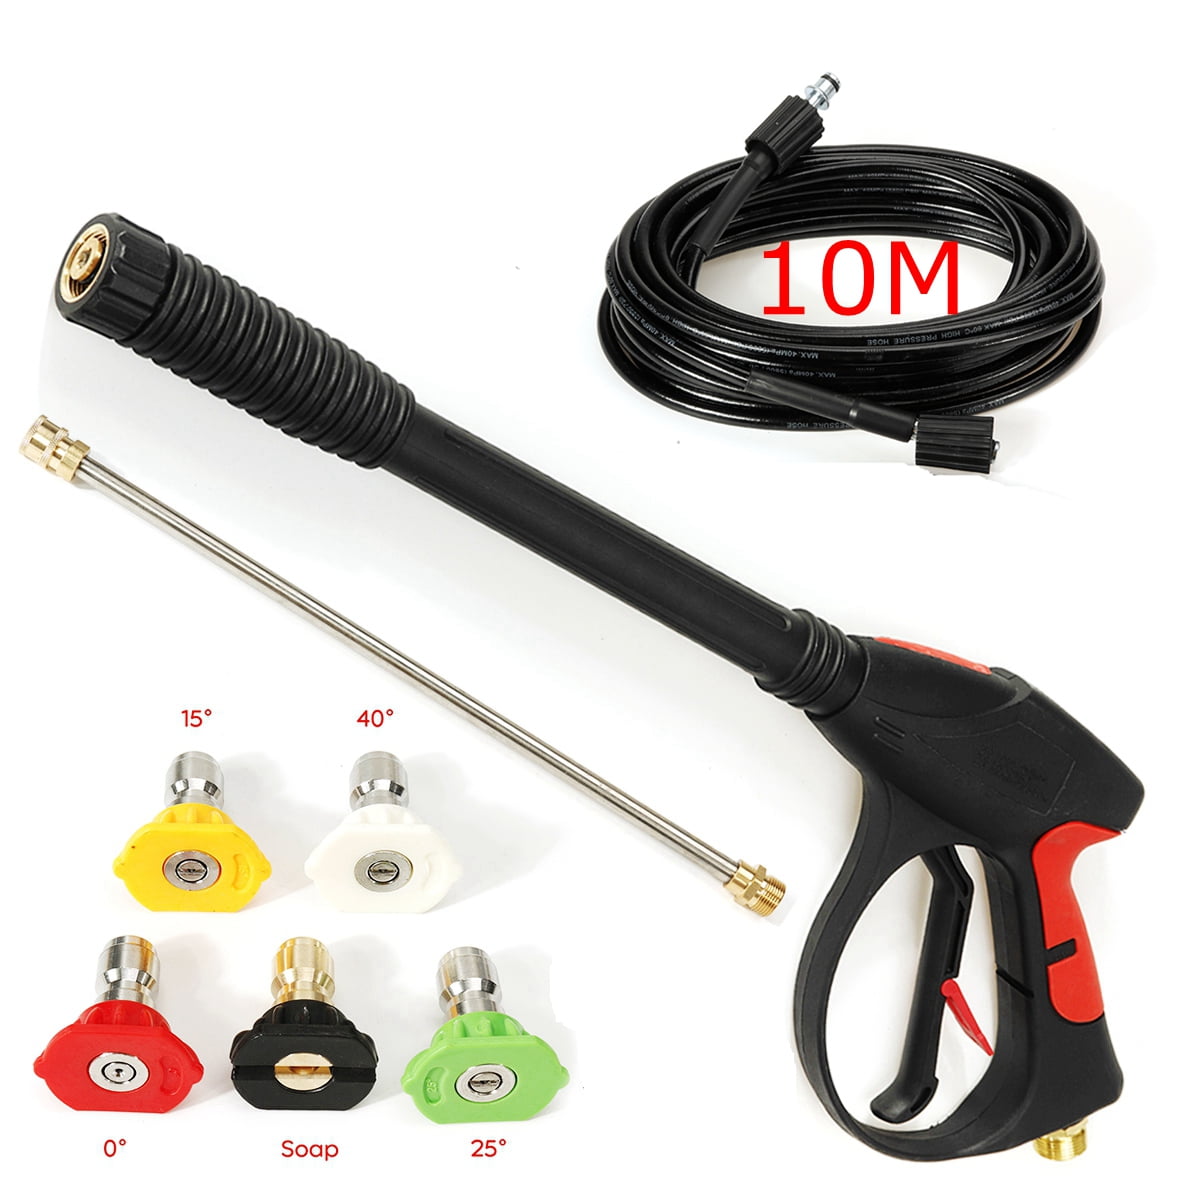 Details about   Replacement Pressure Washer Gun with Extension Wand M22 14mm Fitting 5 Nozzle 